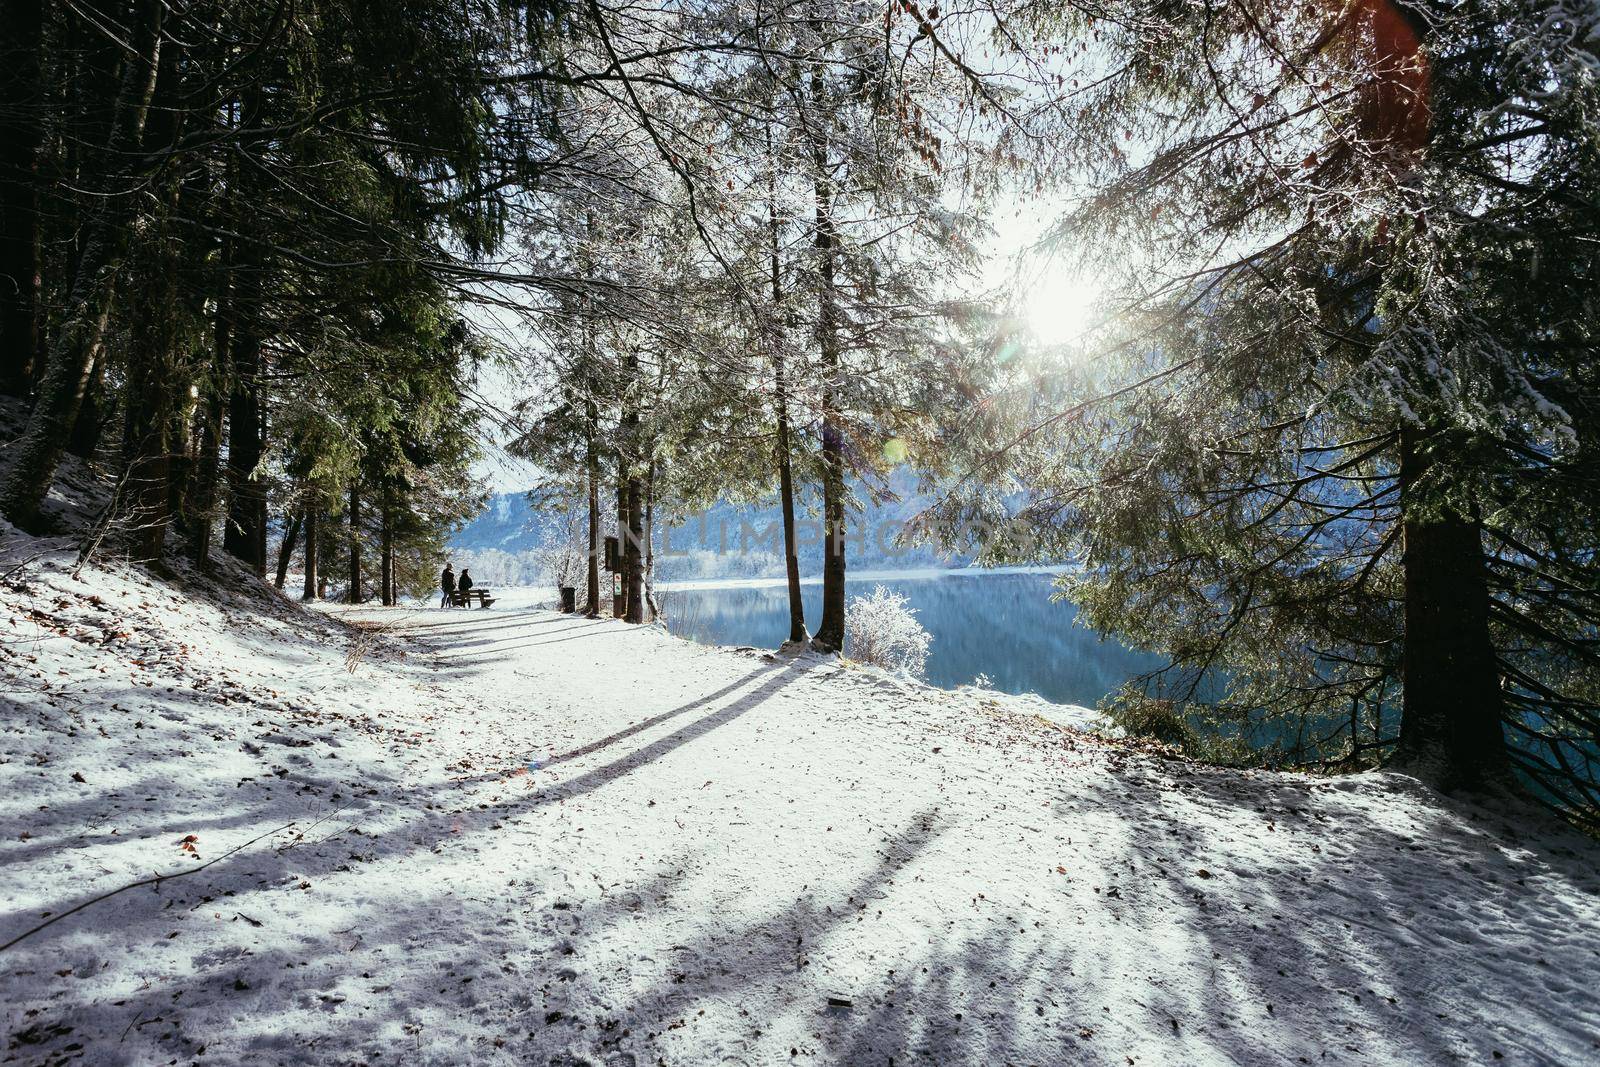 Sunny winter landscape in the nature: Footpath, snowy trees, sunshine and blue sky by Daxenbichler